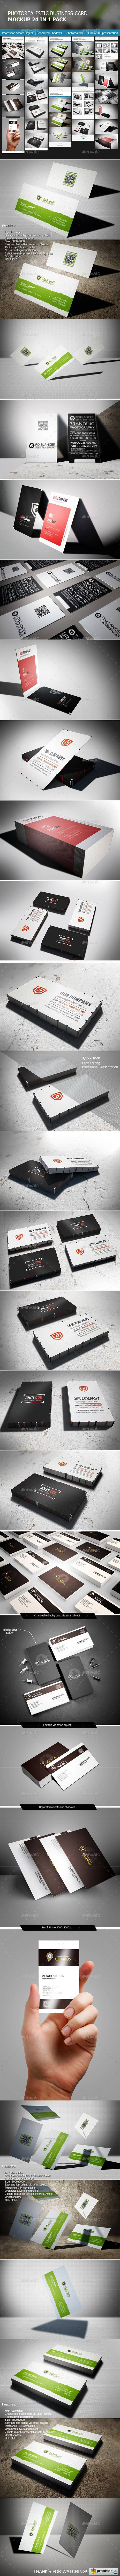 Business Card 24 in 1 Bundle